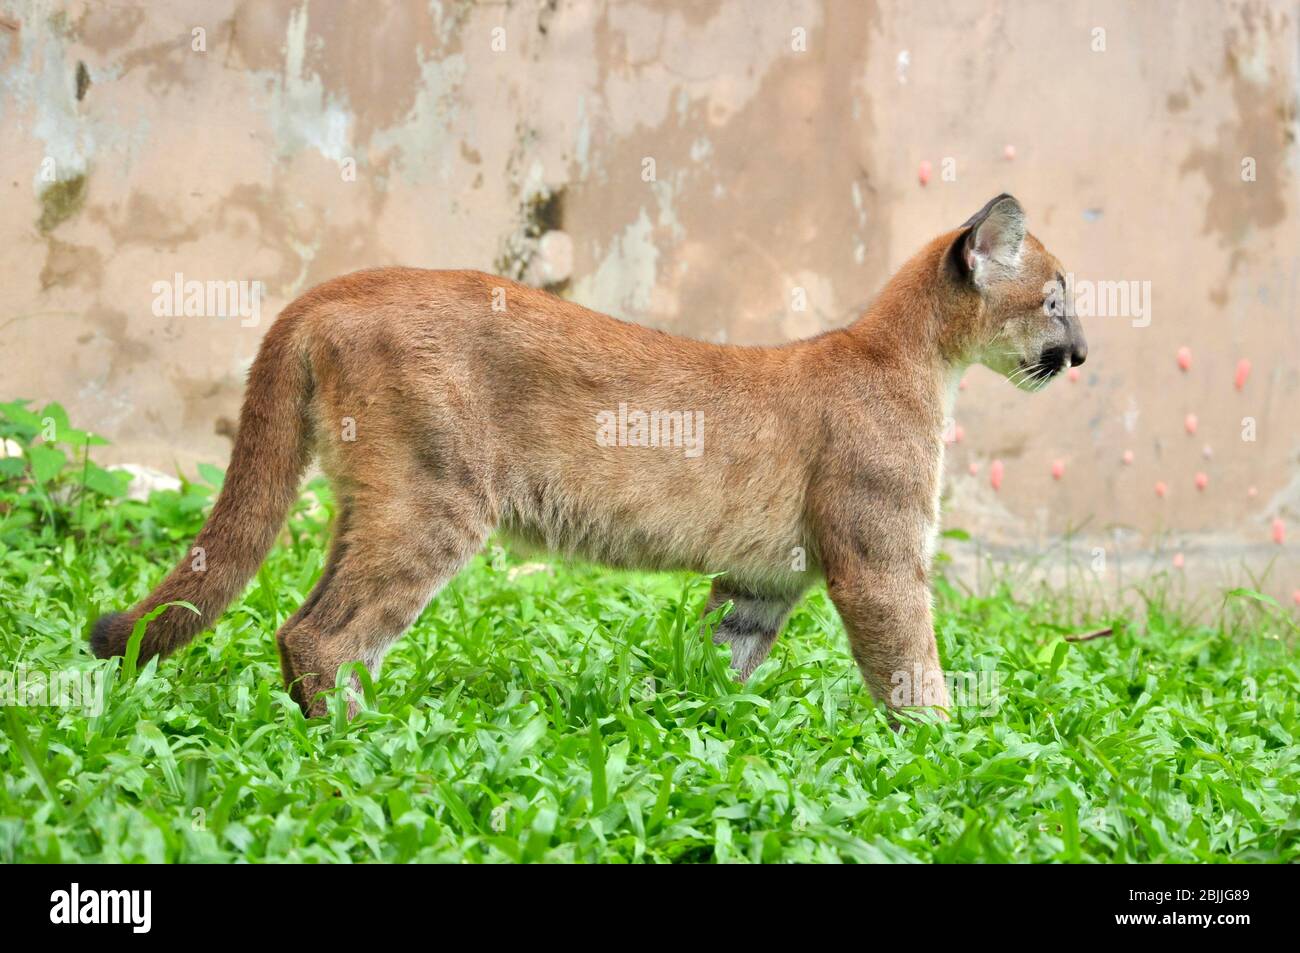 Baby Puma High Resolution Stock Photography and Images - Alamy